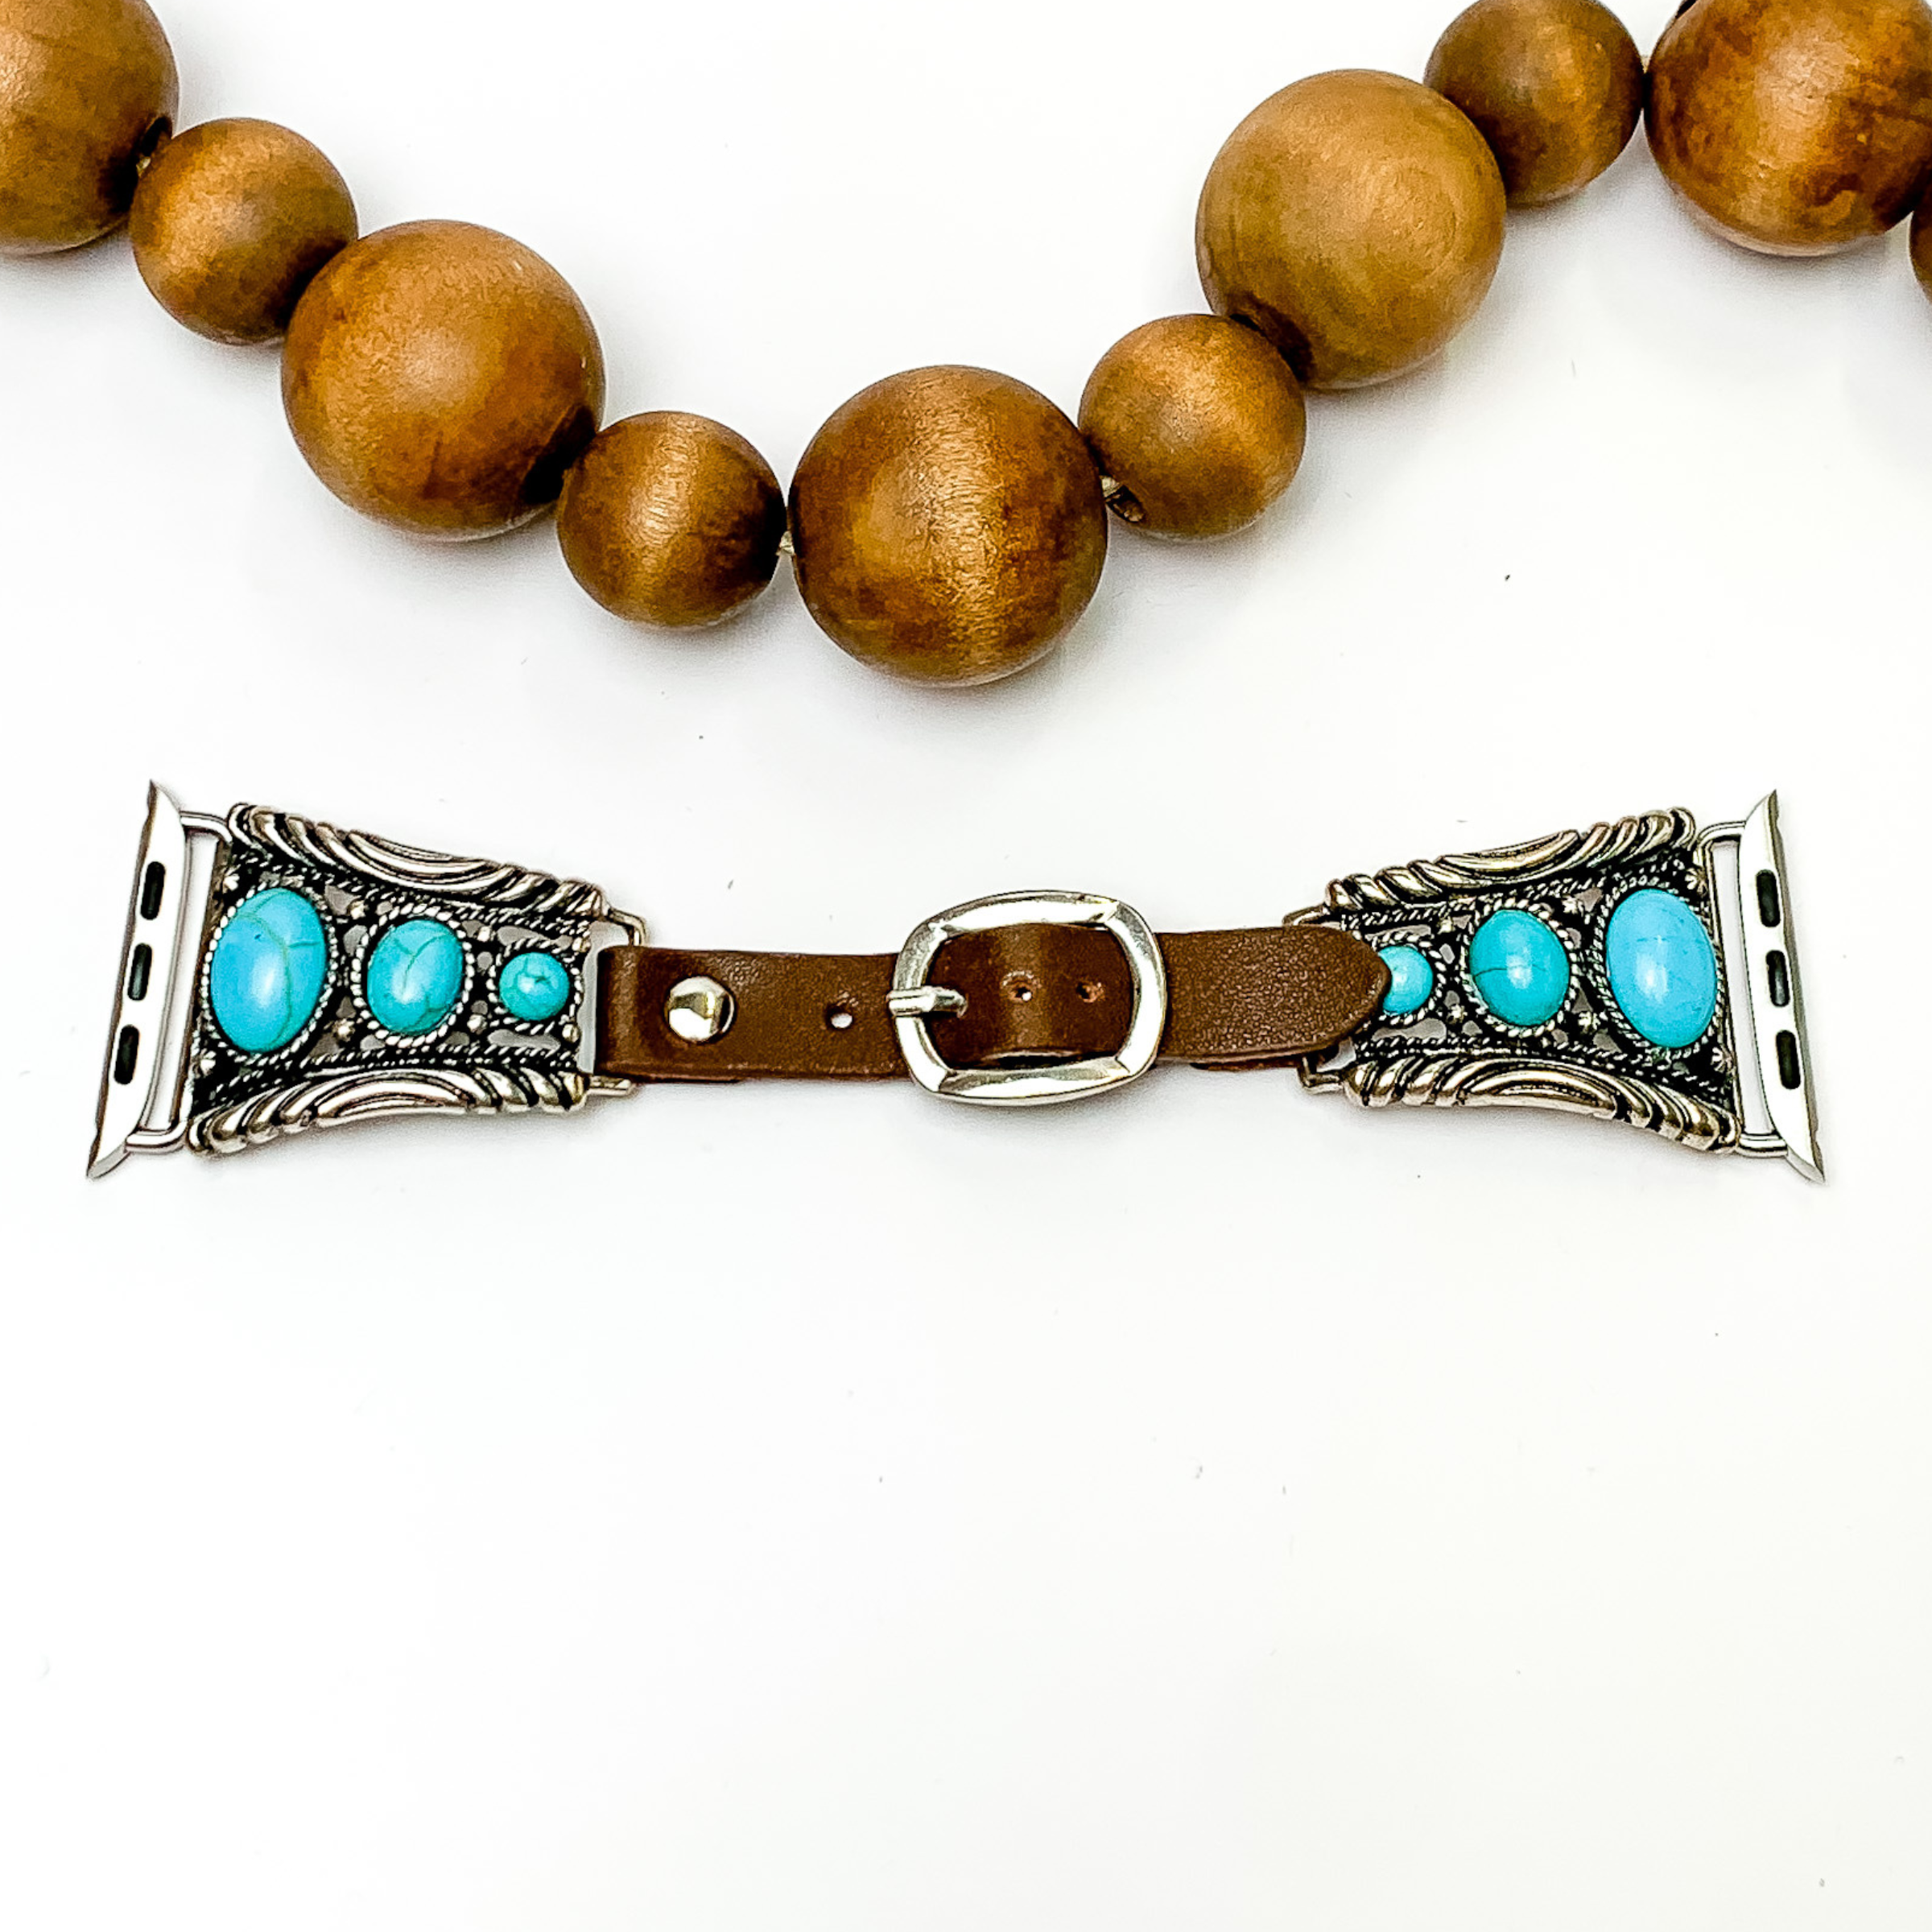 Brown Apple Watch Band with Western Pendant and Turquoise Stones - Giddy Up Glamour Boutique